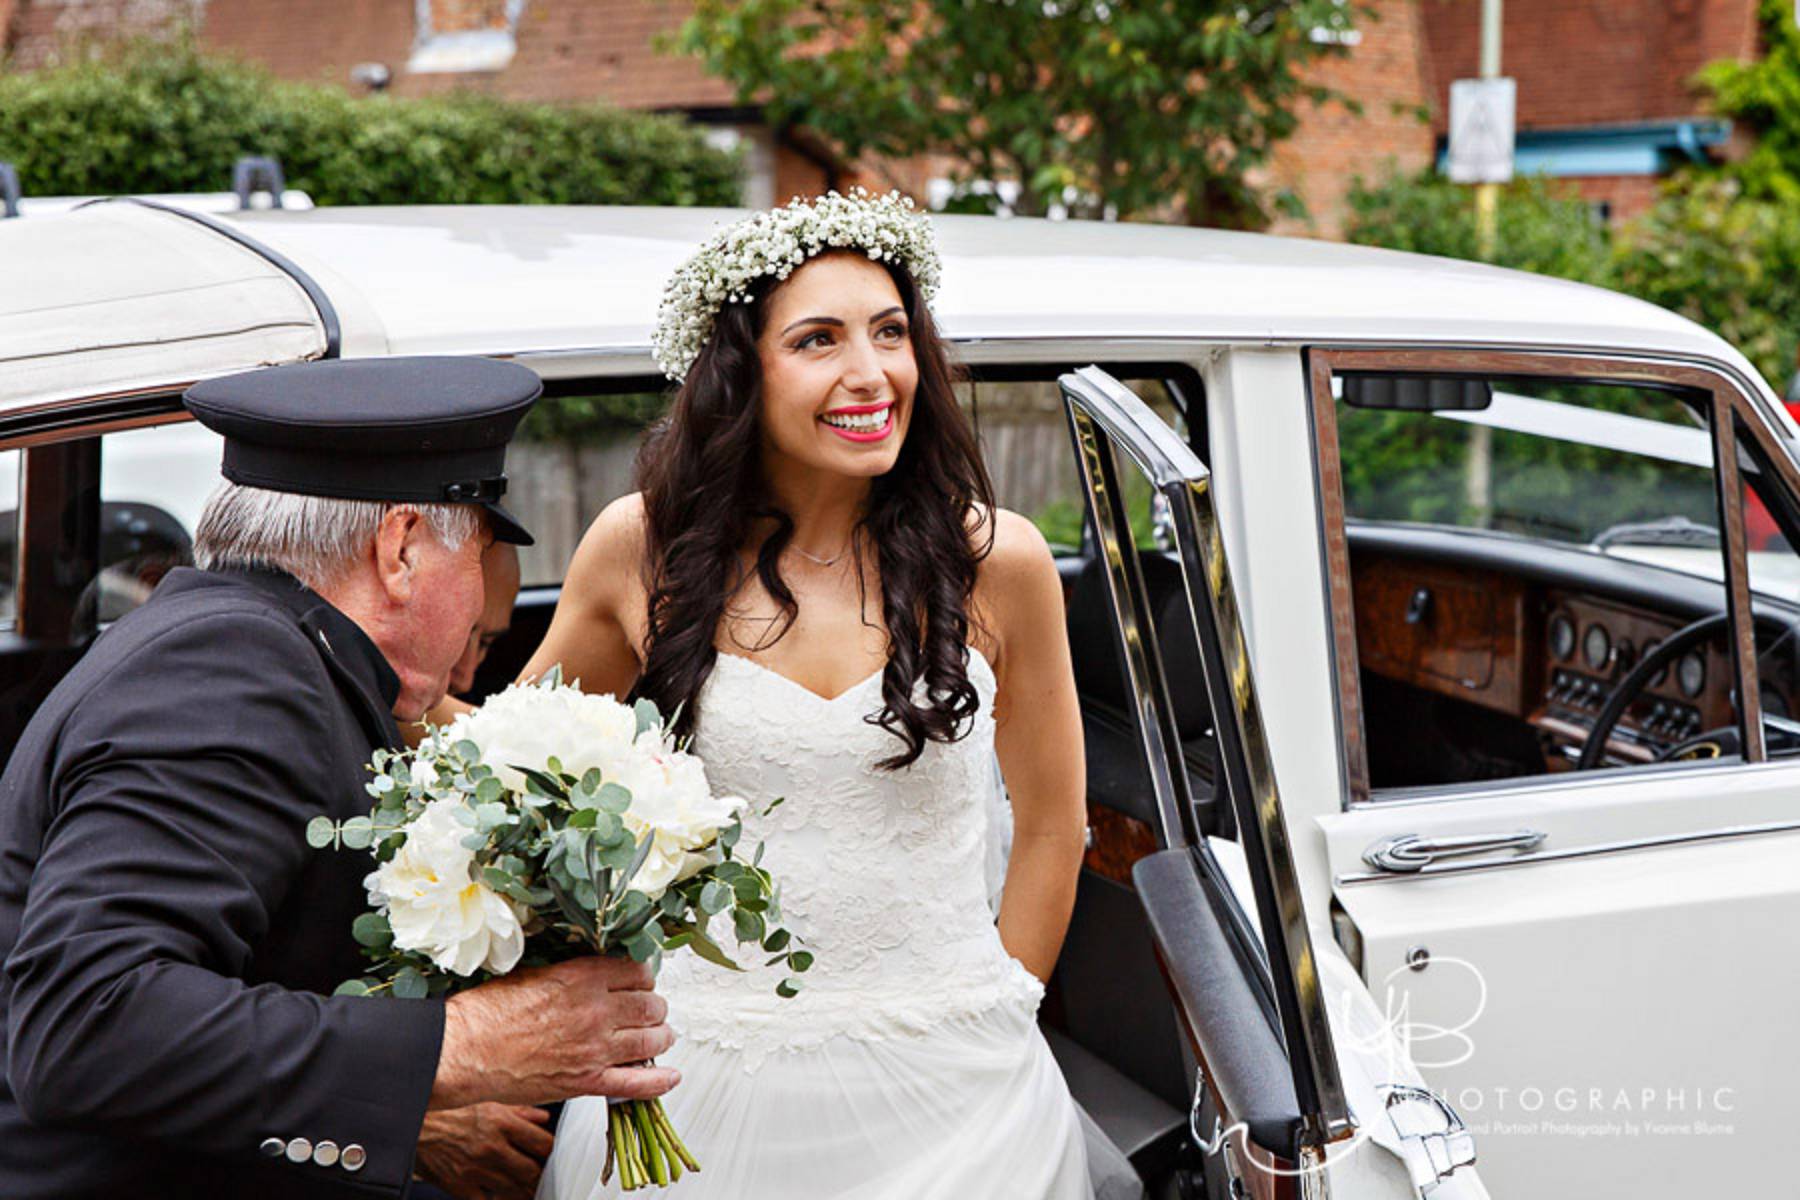 The bride arrives at the Church for her Whitstable wedding by YBPHOTOGRAPHIC